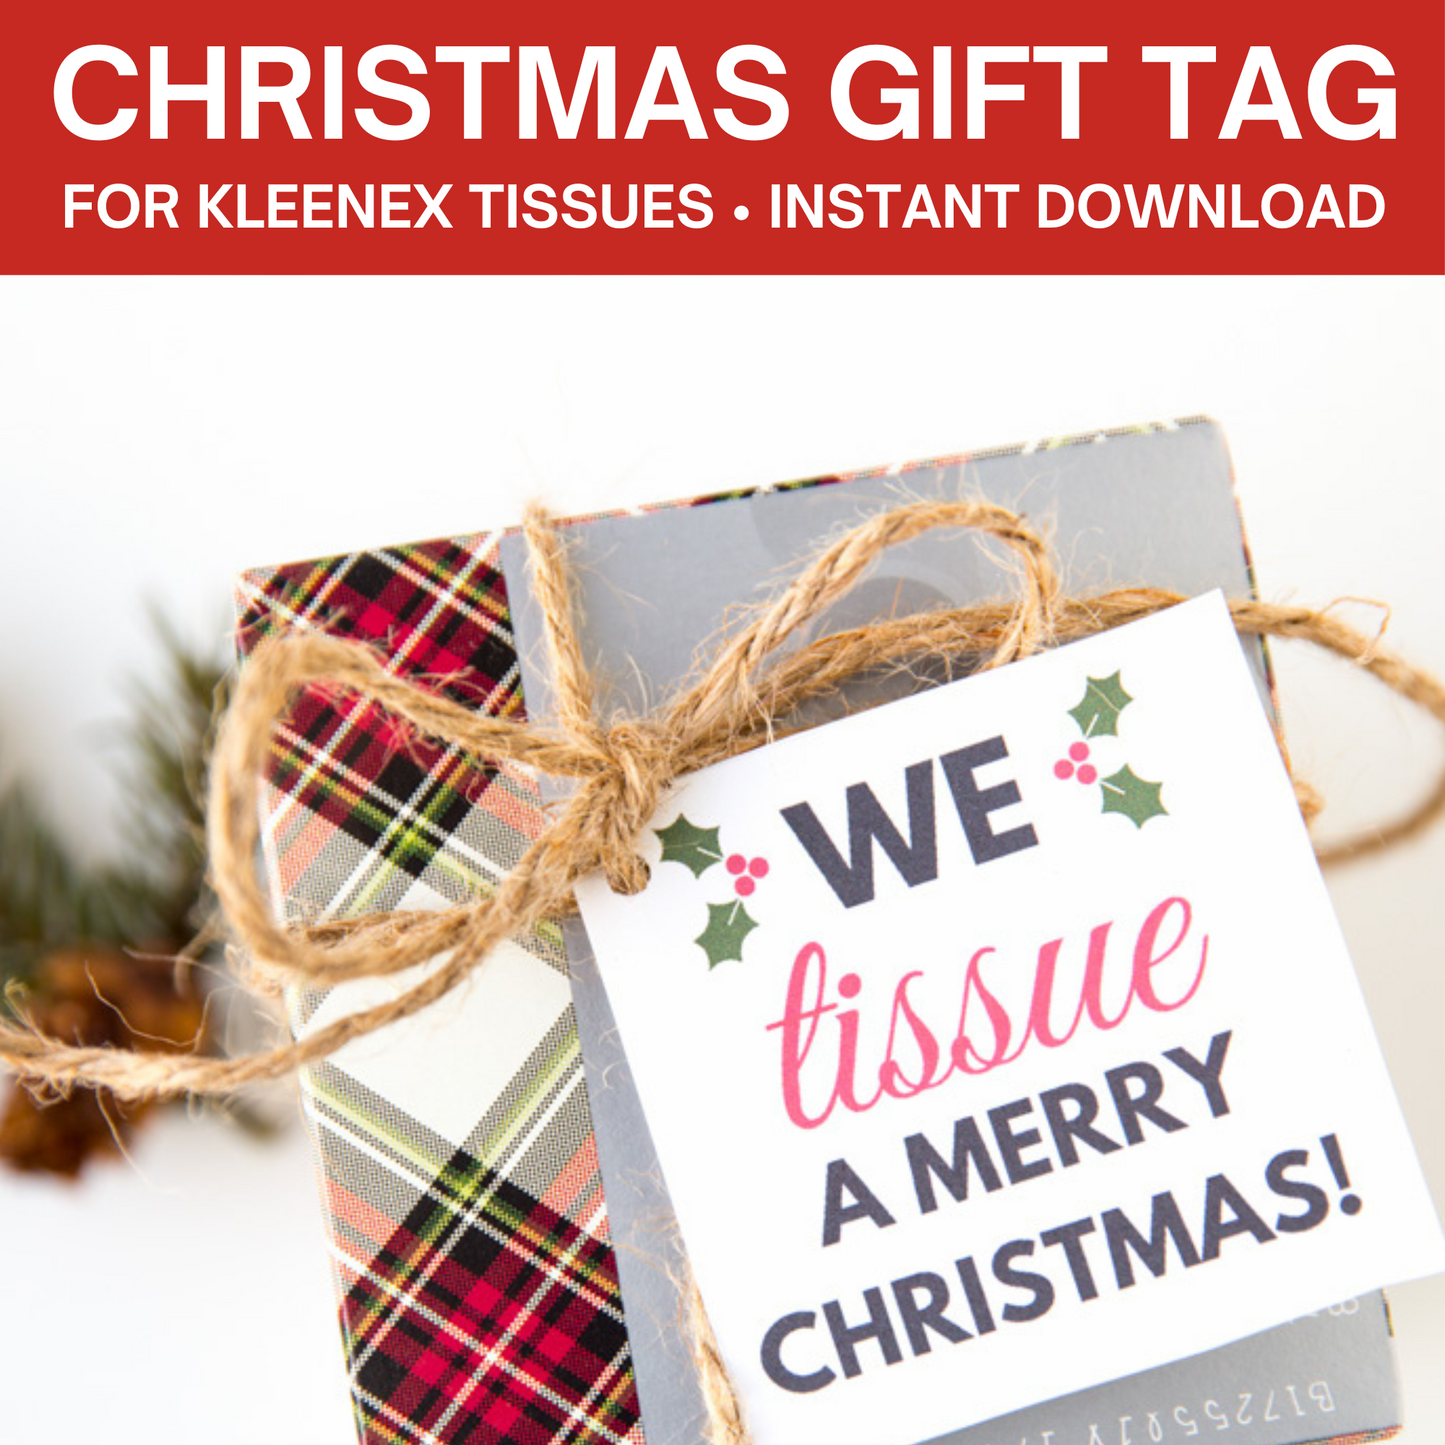 Kleenex/Tissue Neighbor Gift Christmas Tags- Instant Download